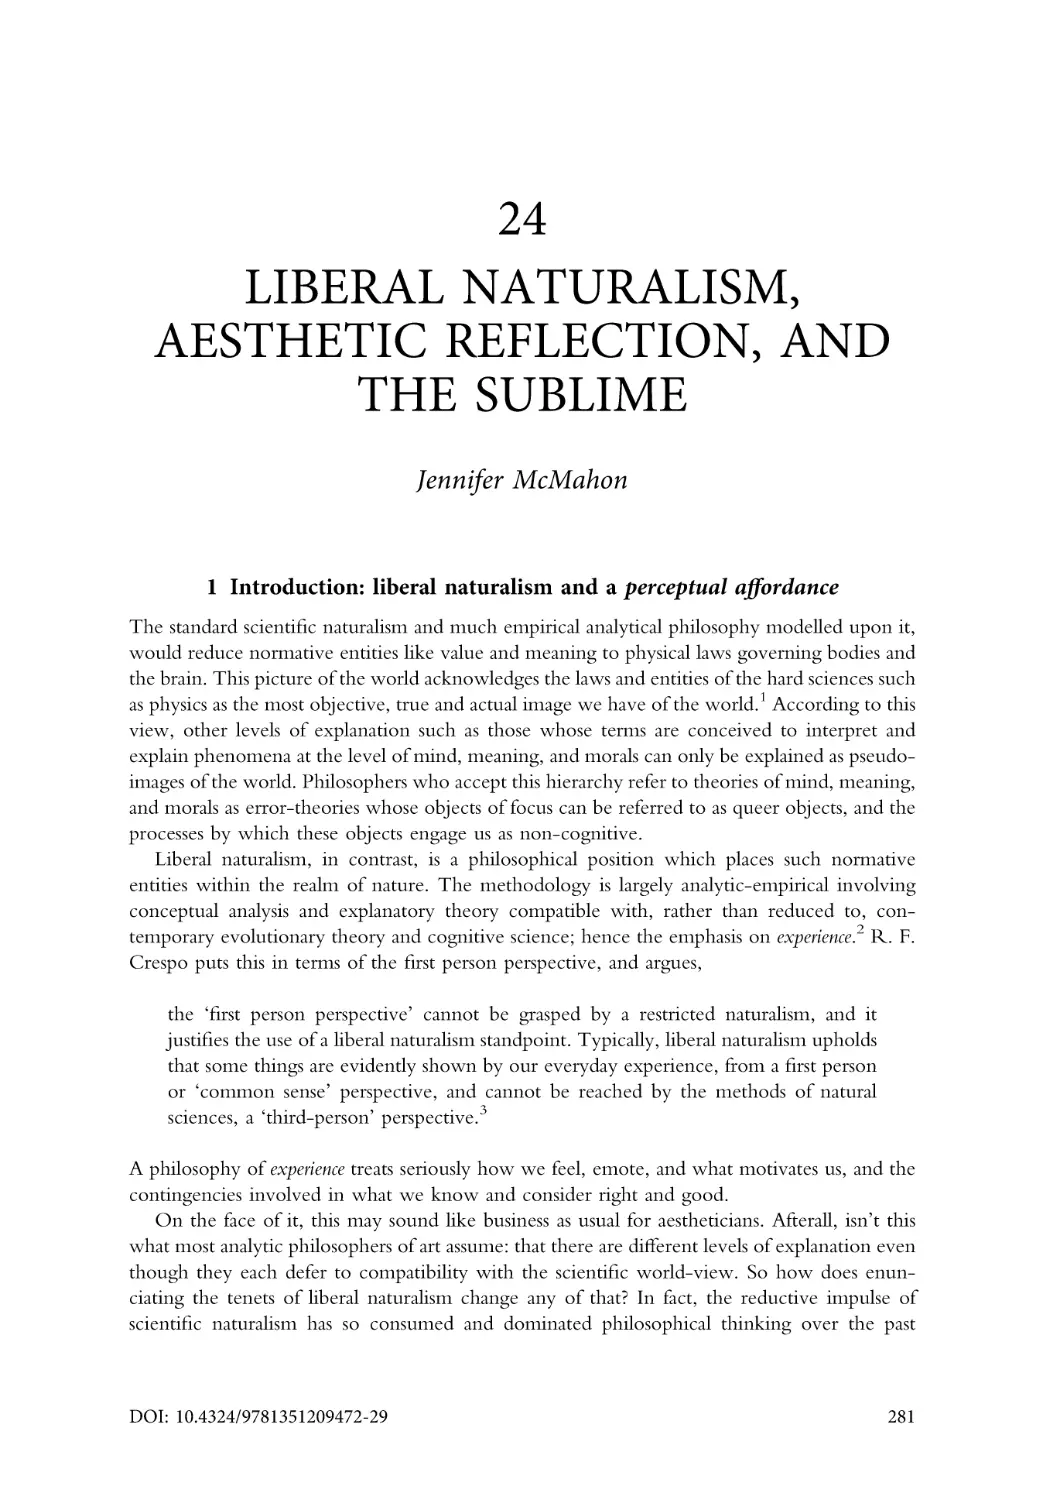 24. Liberal Naturalism, Aesthetic Reflection, and the Sublime
1. Introduction